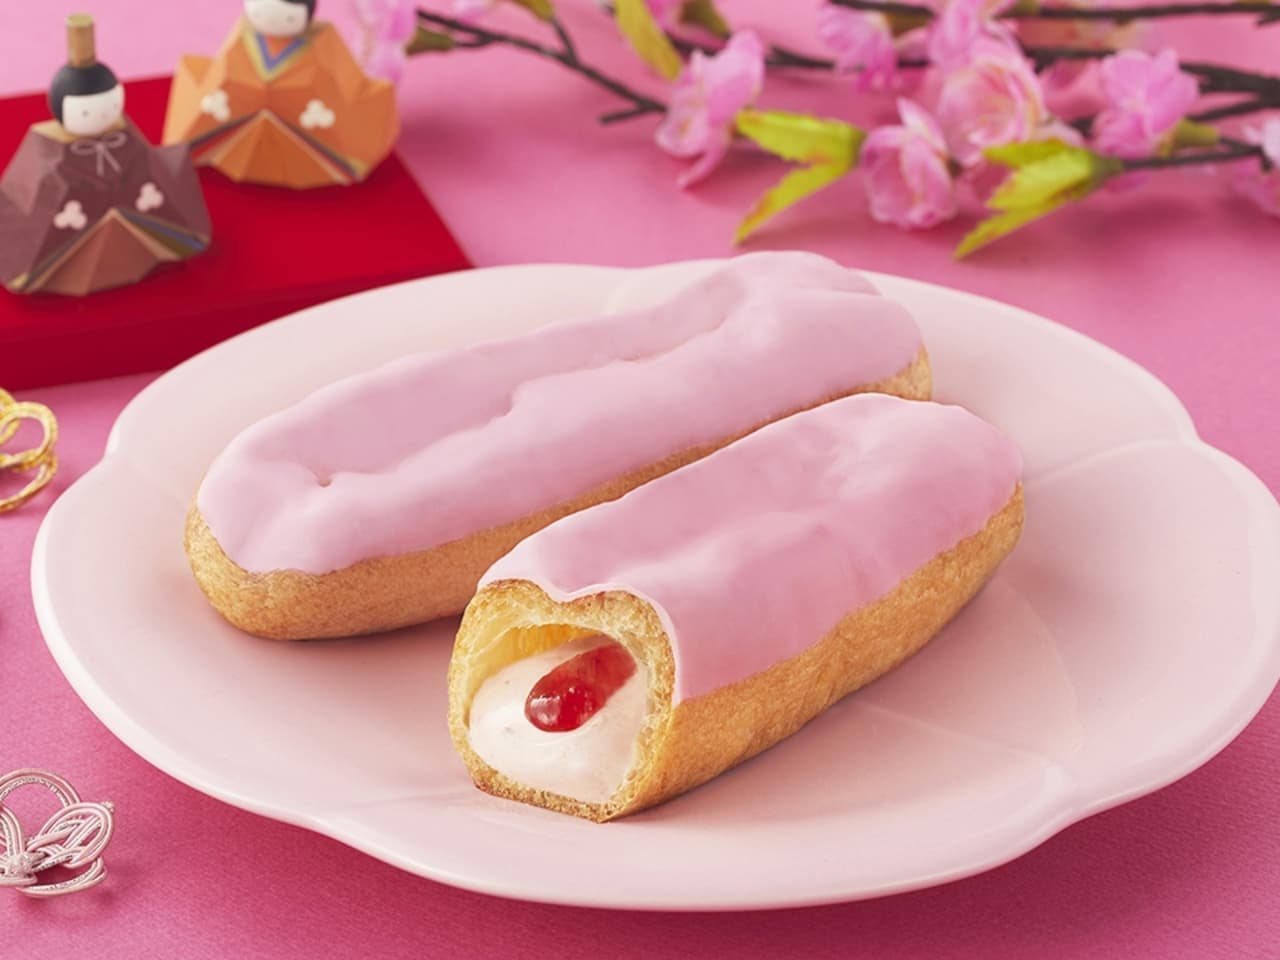 MONTAIRE "Doll Festival Eclair